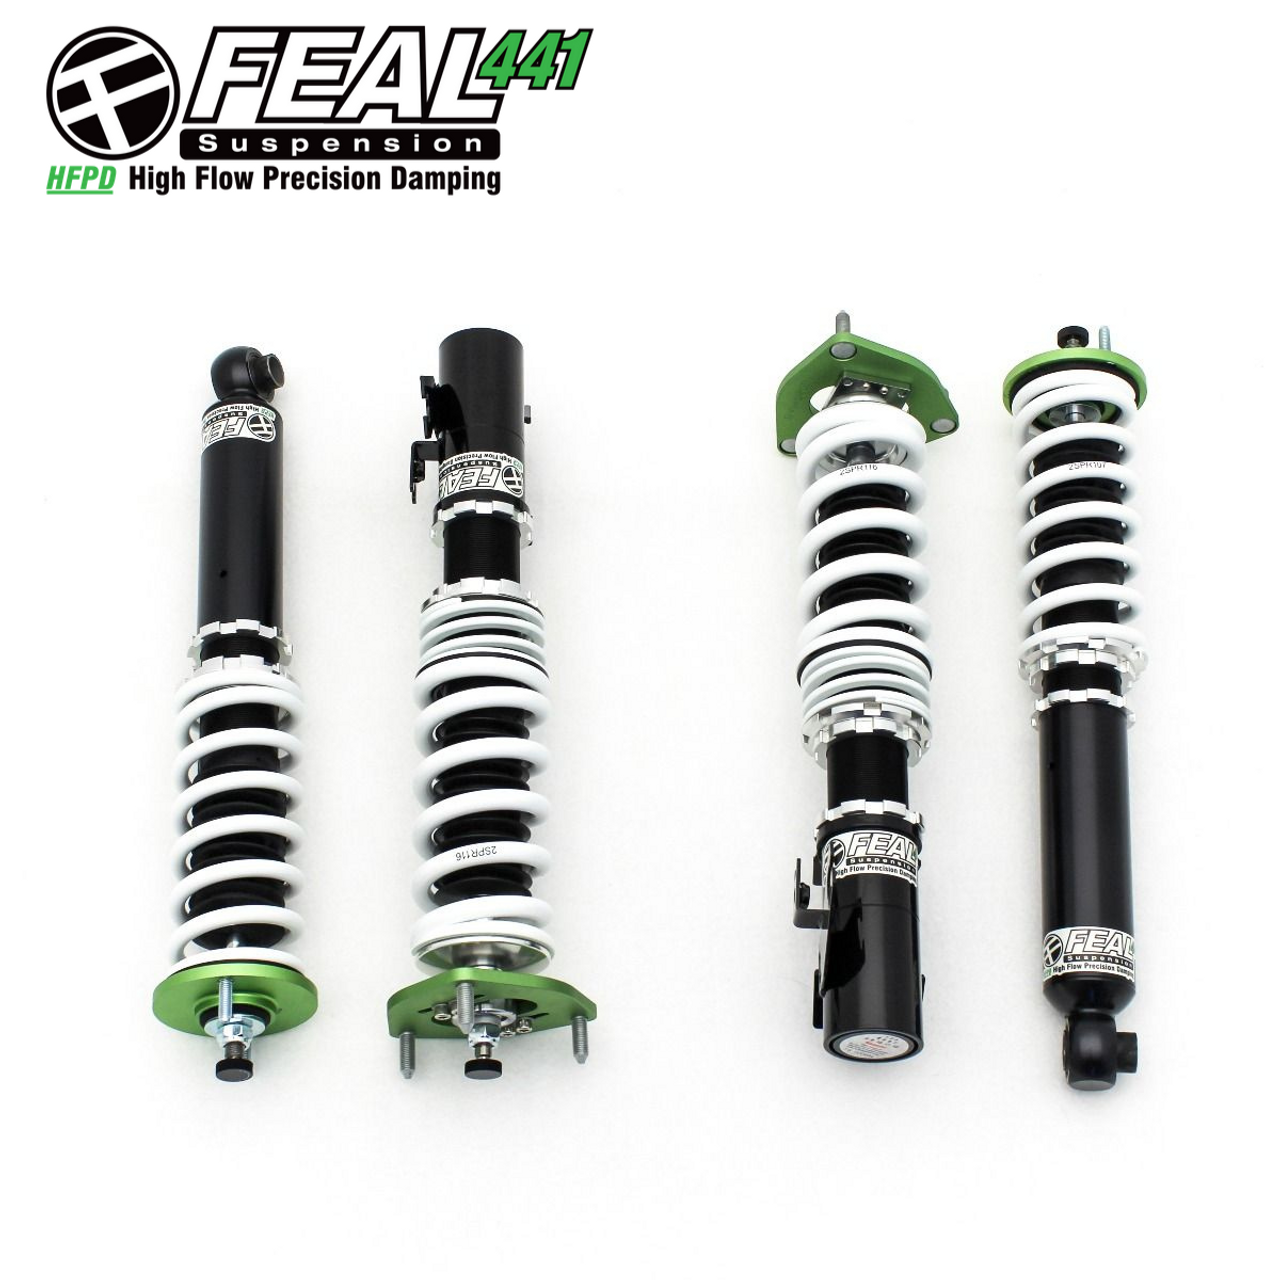 Feal Suspension 441 Coilover Kit, AWD - Nissan R32 GT-R